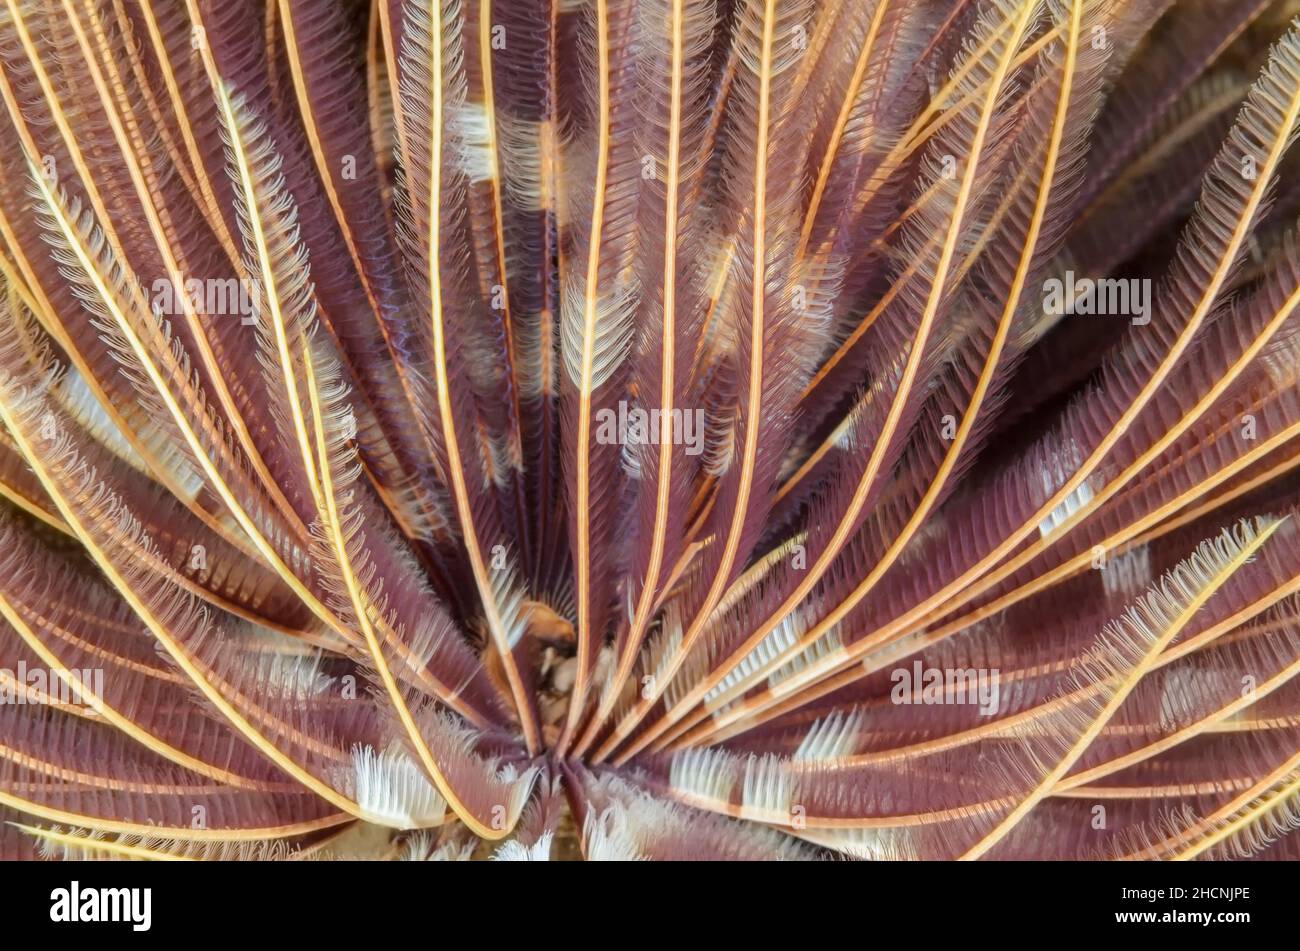 Indian Feather Duster Worm, Sabellastarte indica, Alor, Nusa Tenggara, Indonesia, Pacific Stock Photo